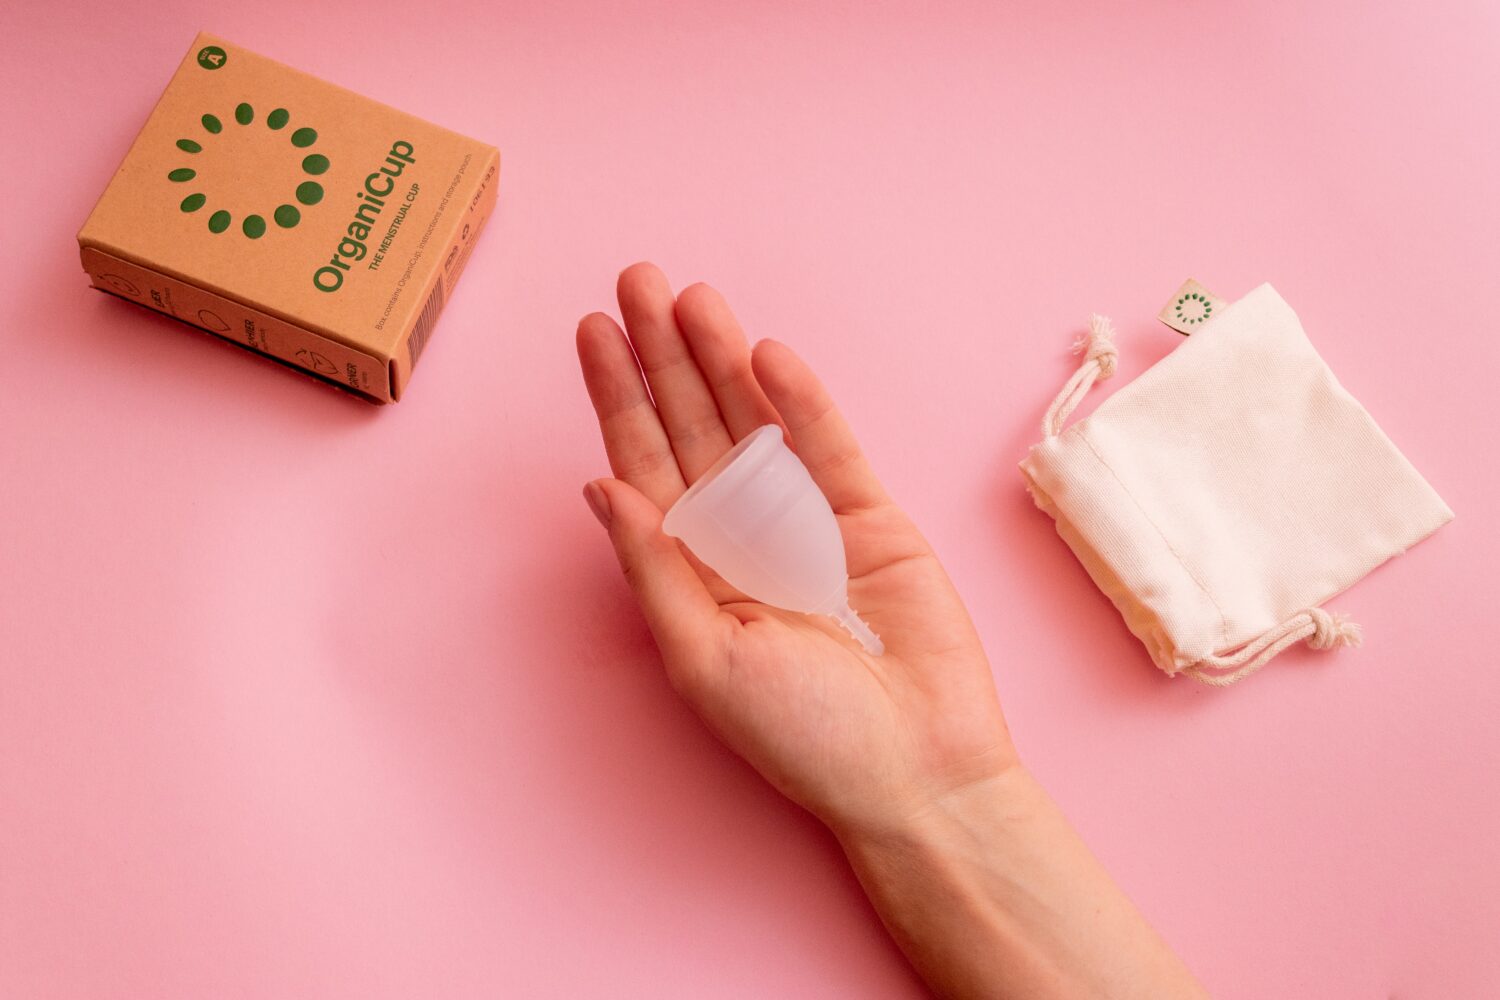 Wondering if a menstrual cup is the right choice? We have got you covered